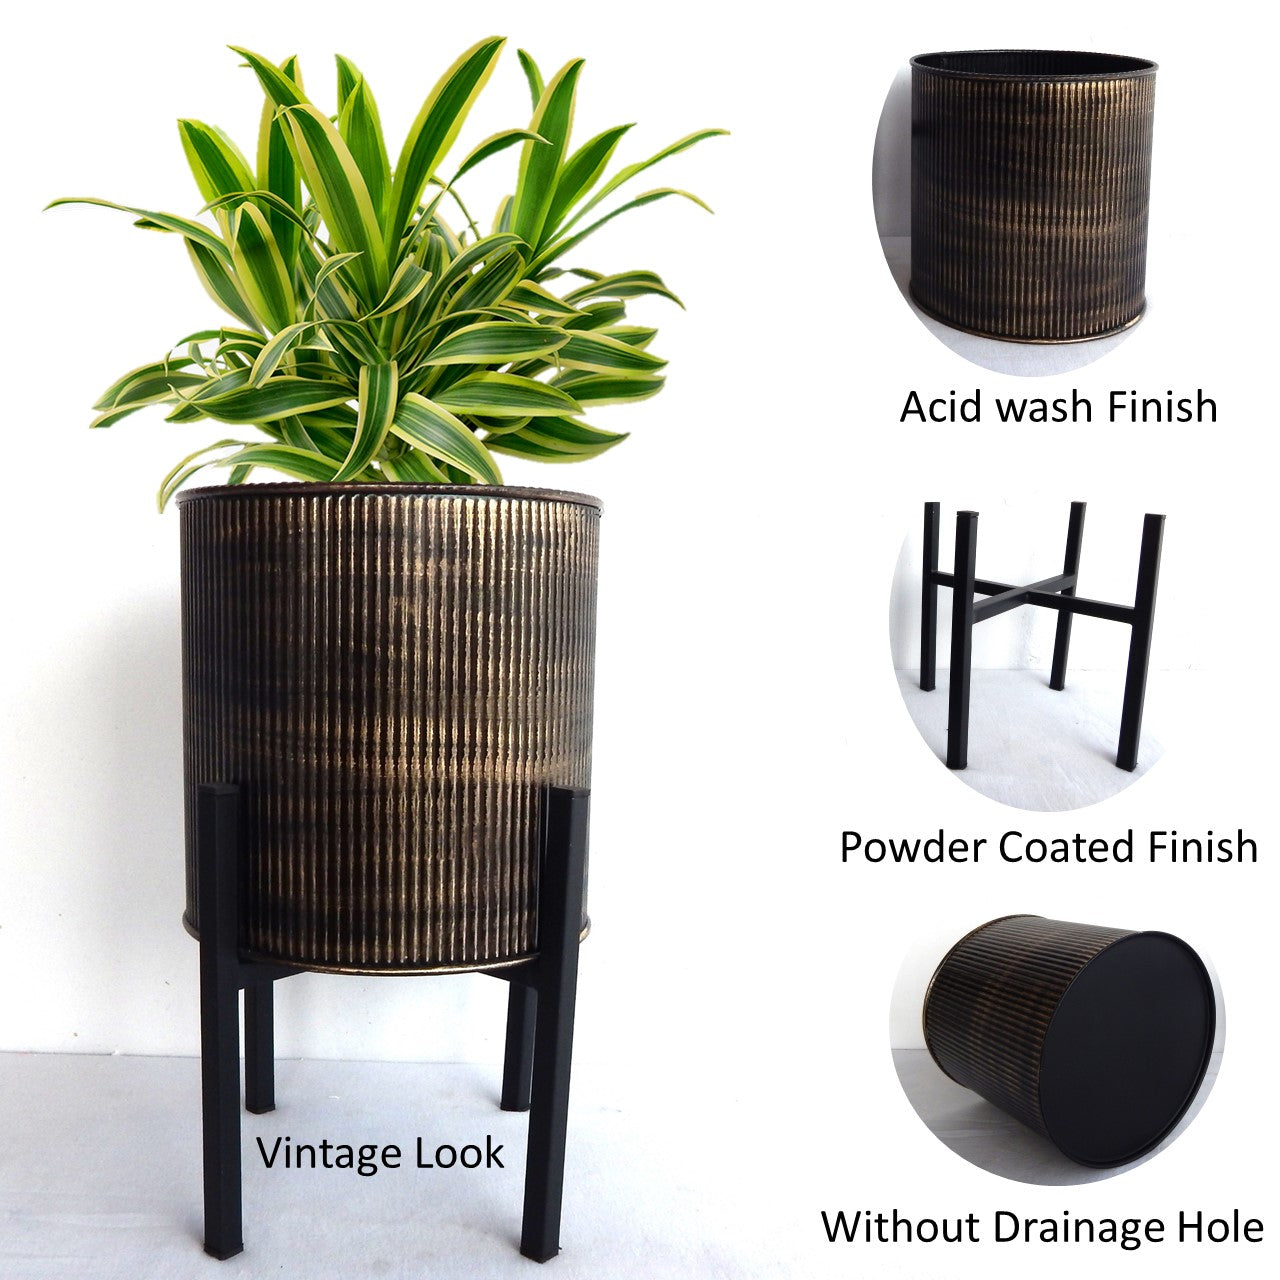 ecofynd 8 inches Chris Metal Vintage Plant Pot with Stand Planter freeshipping - Ecofynd